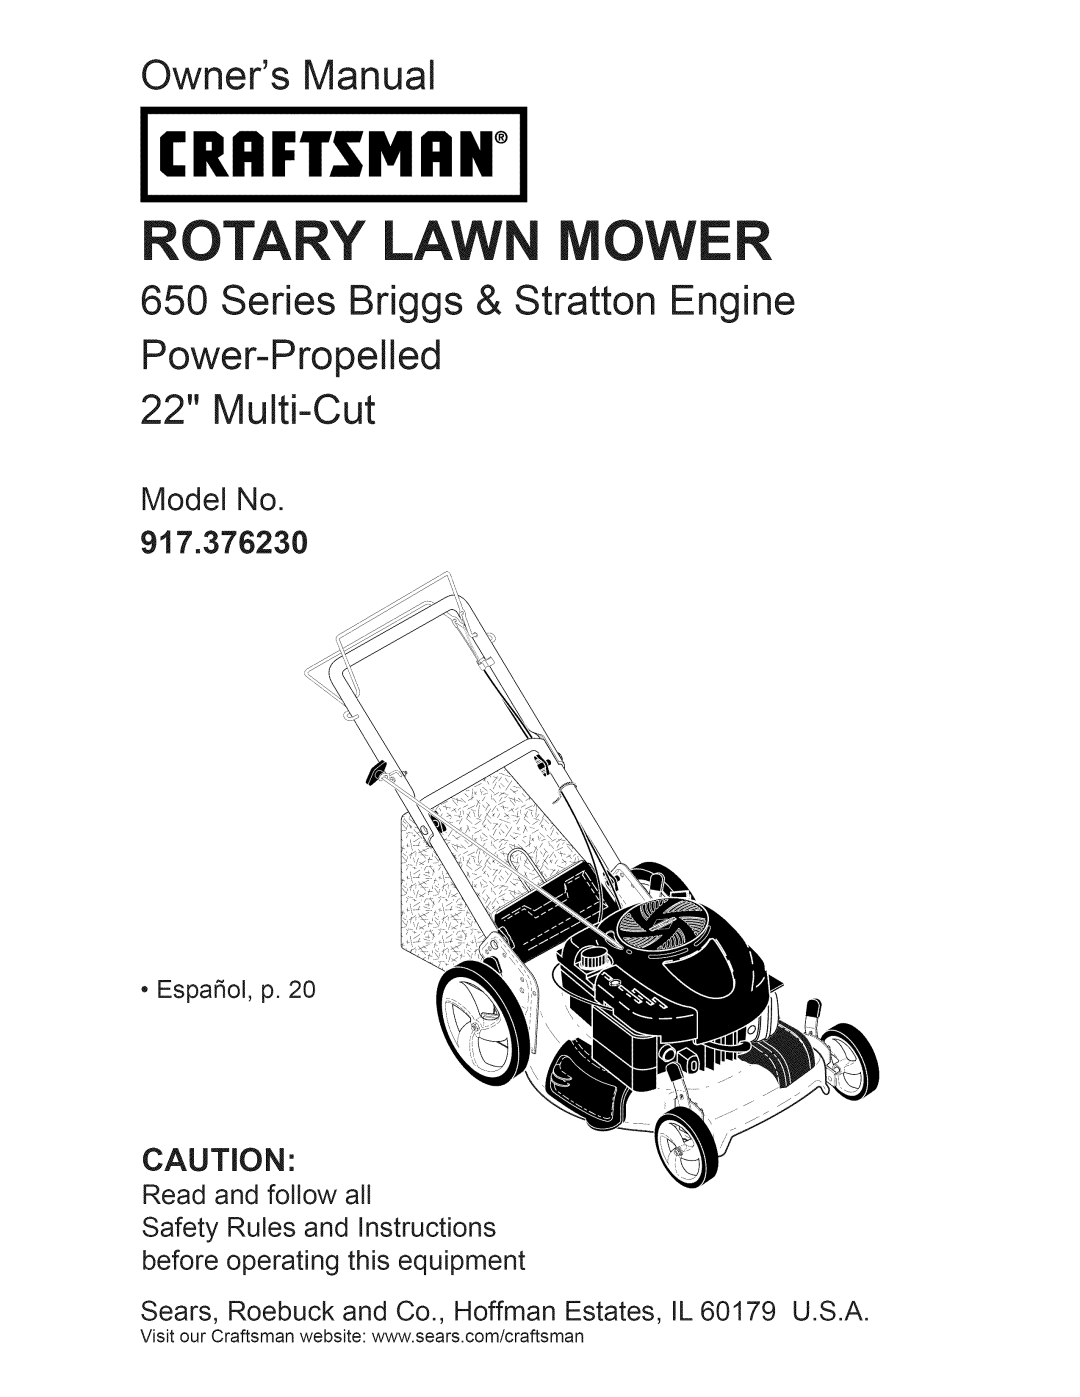 Craftsman manual Model No 917.376230, Craftsman, Rotary Lawn Mower, Owners Manual, Series Briggs & Stratton Engine 